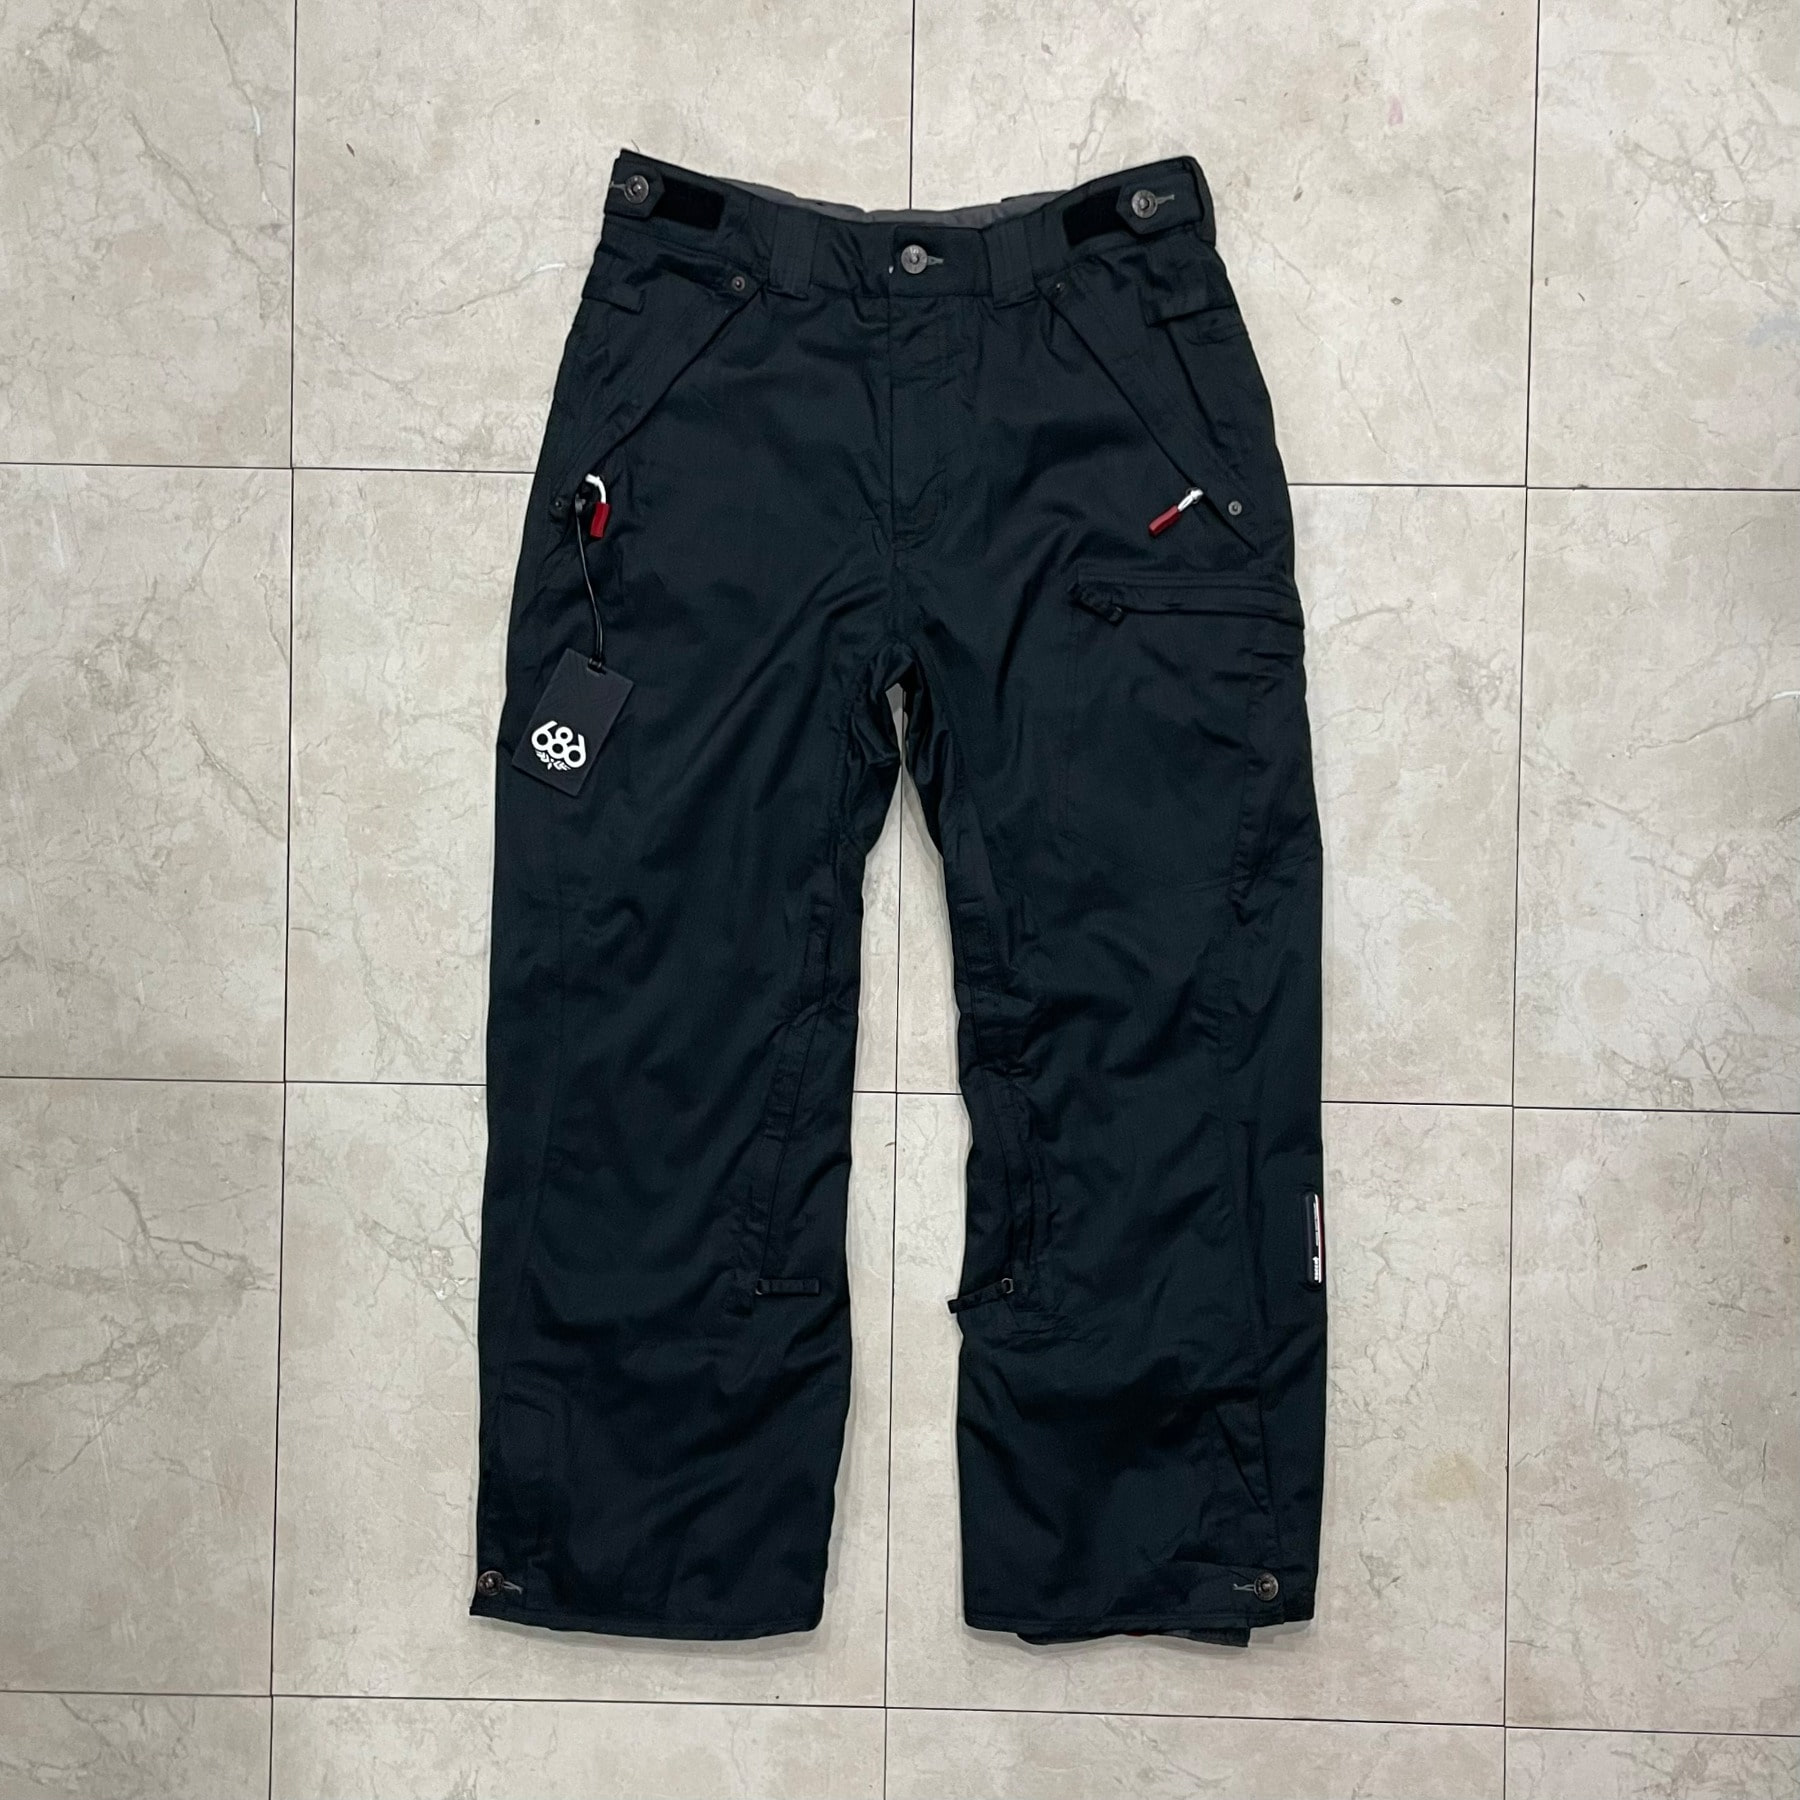 Levis x 686 Snowboard Pants - 32 to 36inch